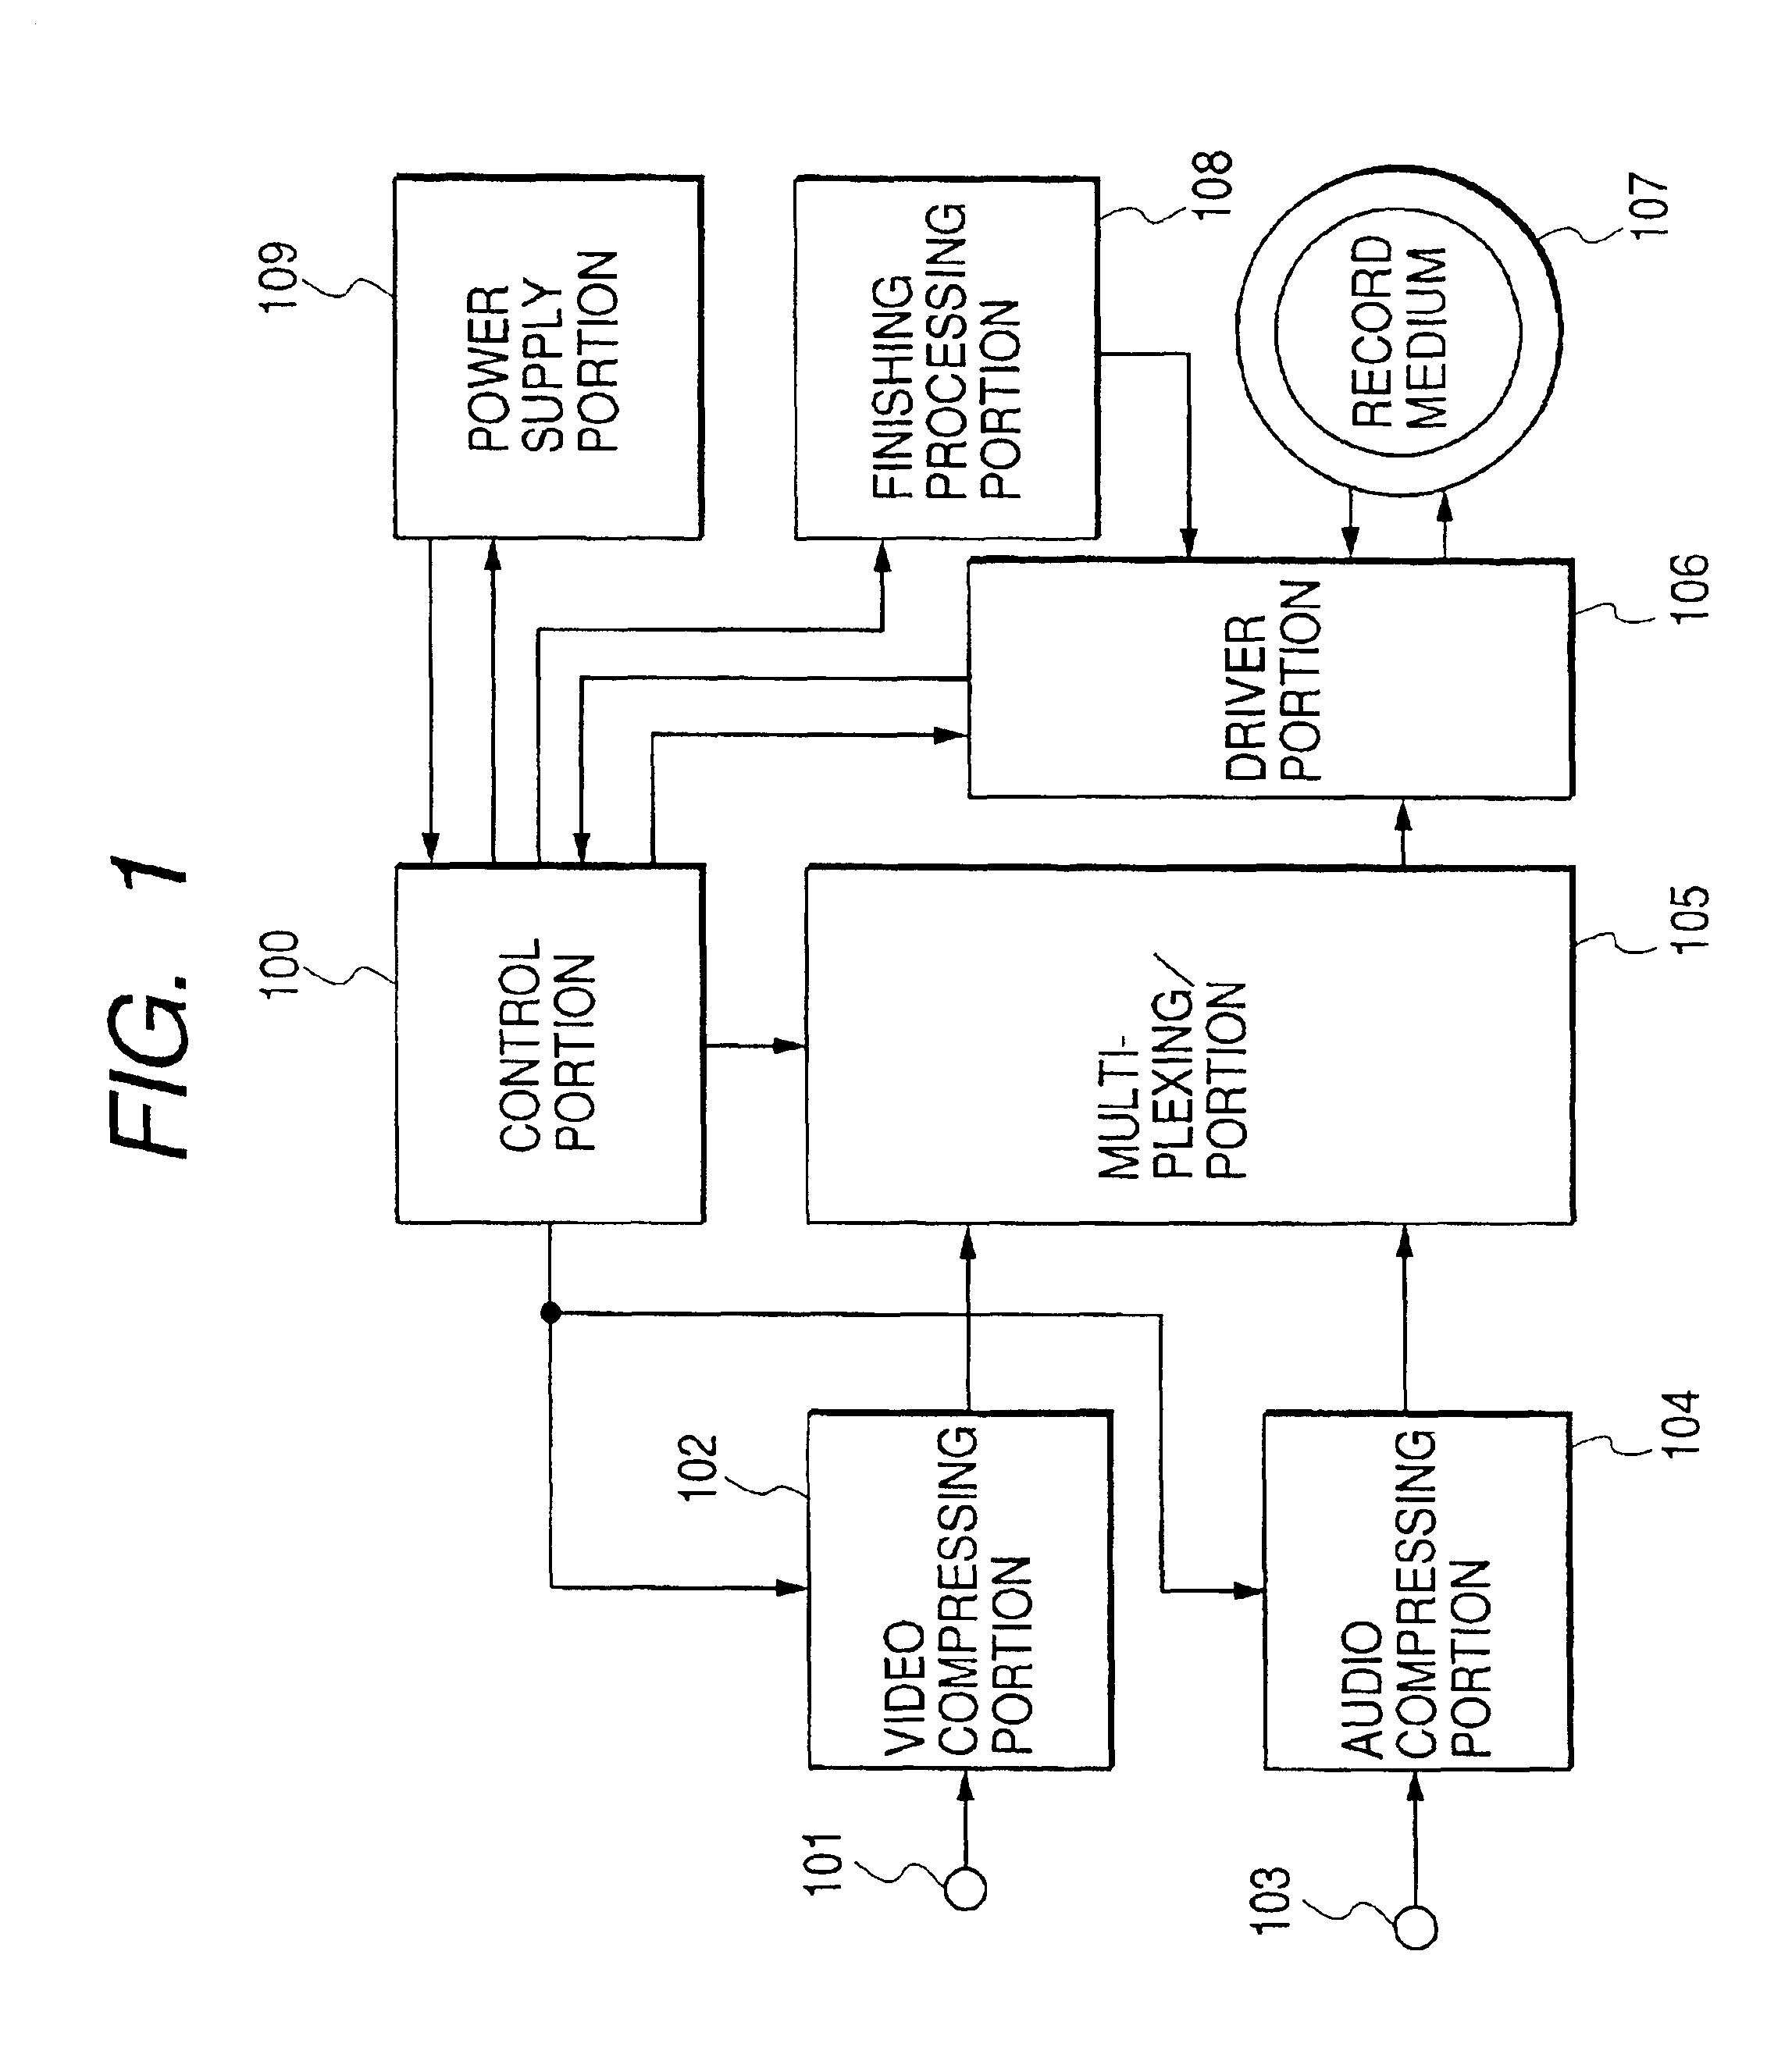 Information recording apparatus for modifying the finishing process based on the power supply